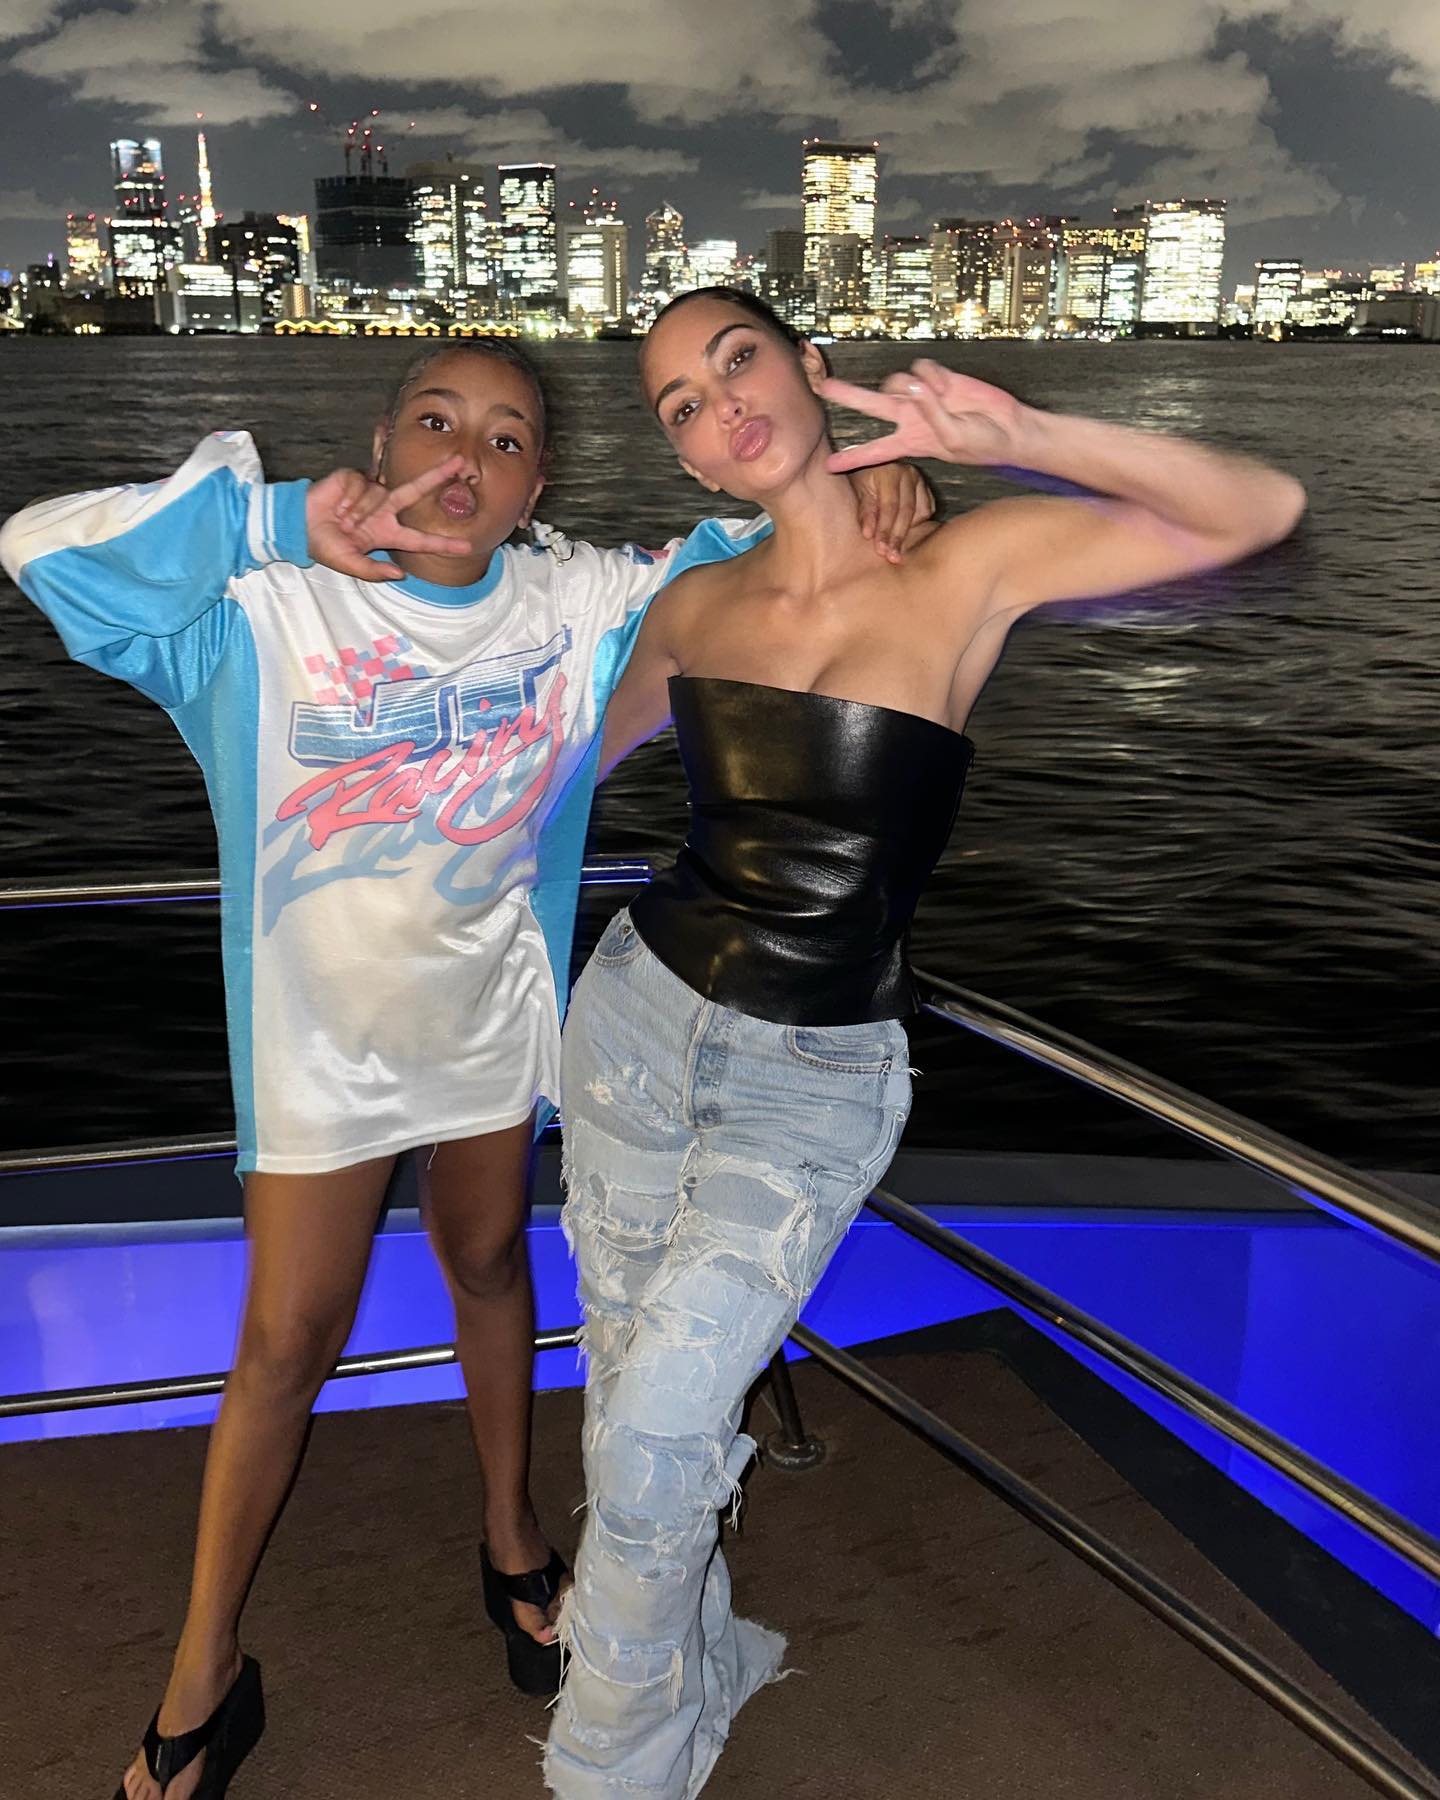 likhoa kim kardashian shares an exciting moment with her daughter north west on a private multi million dollar yacht 652a5e2b92818 Kim Kardashian Shares An Exciting Moment With Her Daughter North West On A Private Multi-million Dollar Yacht